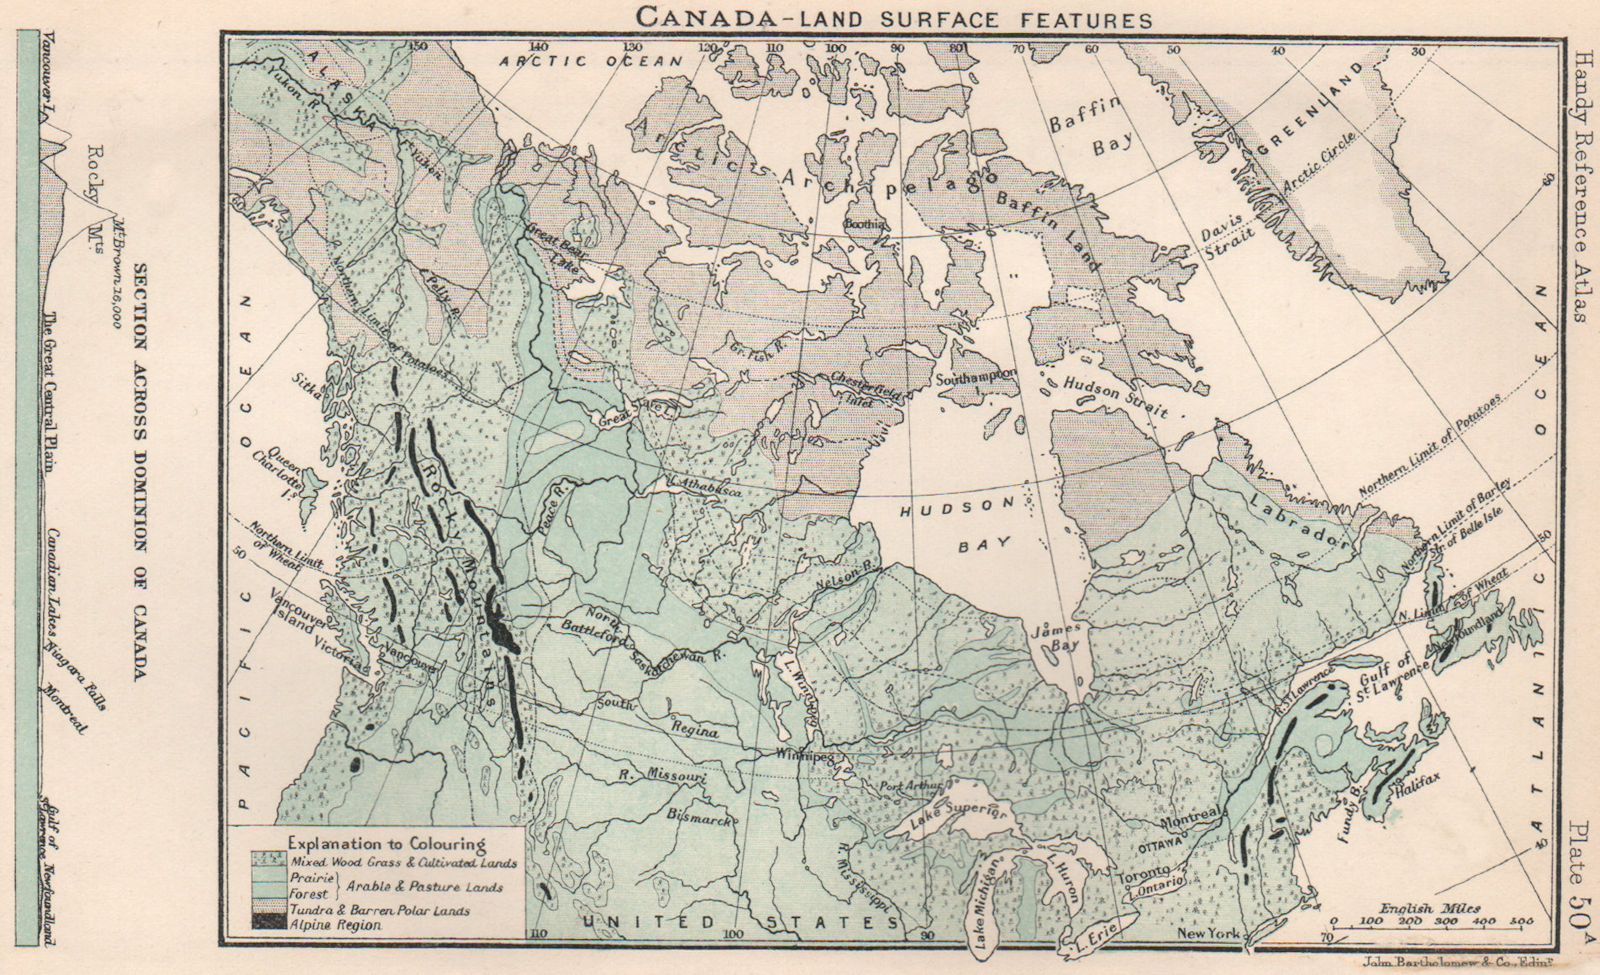 Associate Product Canada - Land Surface Features. Section across Canada. BARTHOLOMEW 1904 map